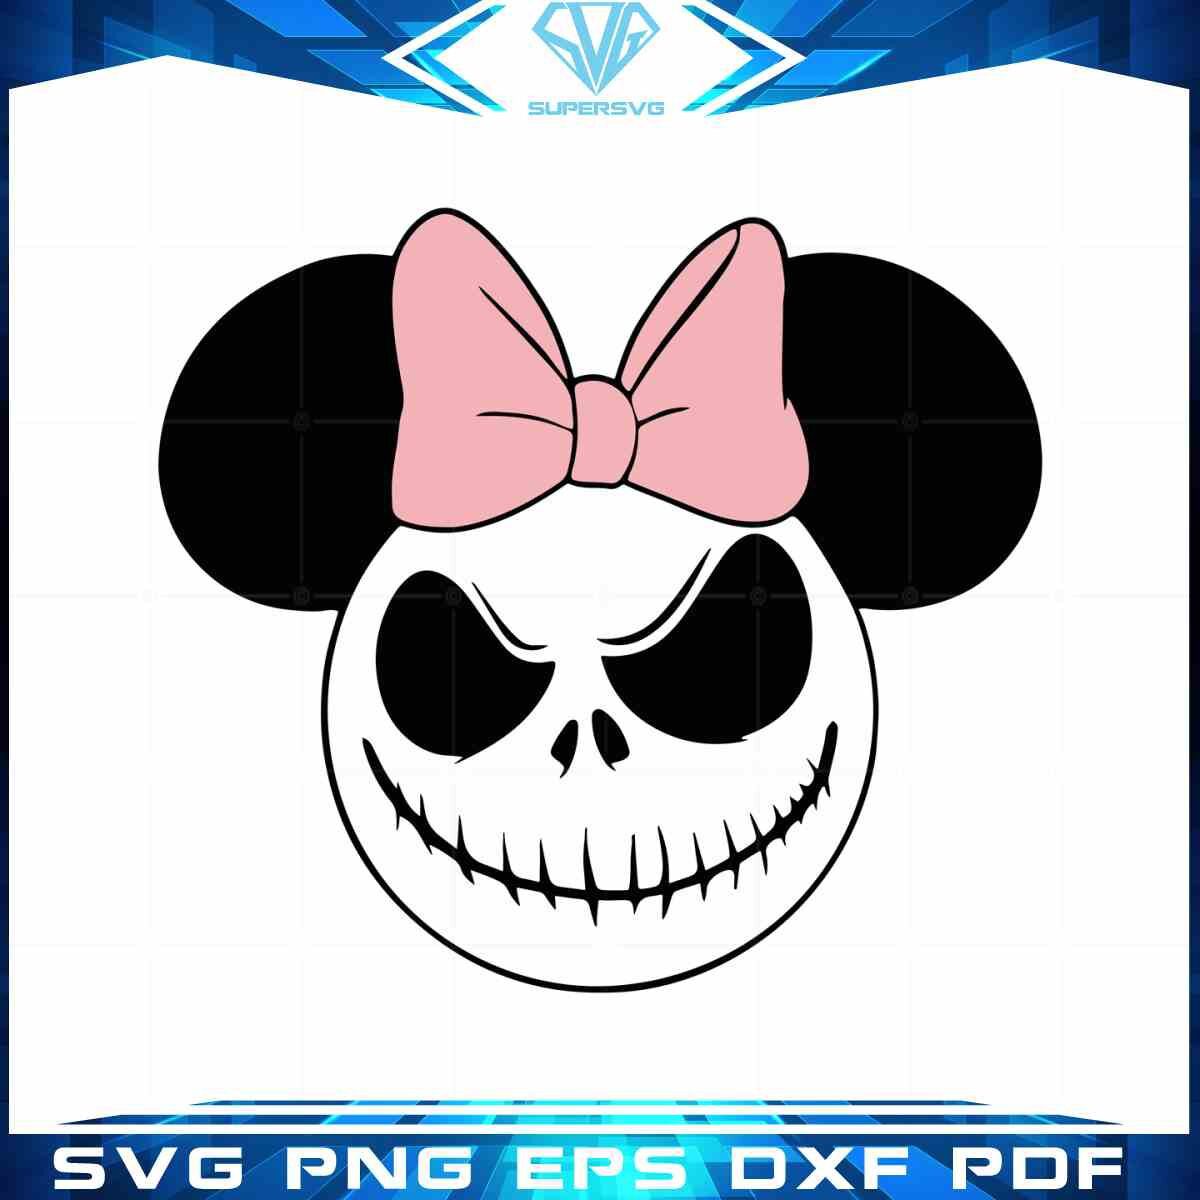 minnie-mouse-halloween-svg-cutting-file-for-personal-commercial-uses